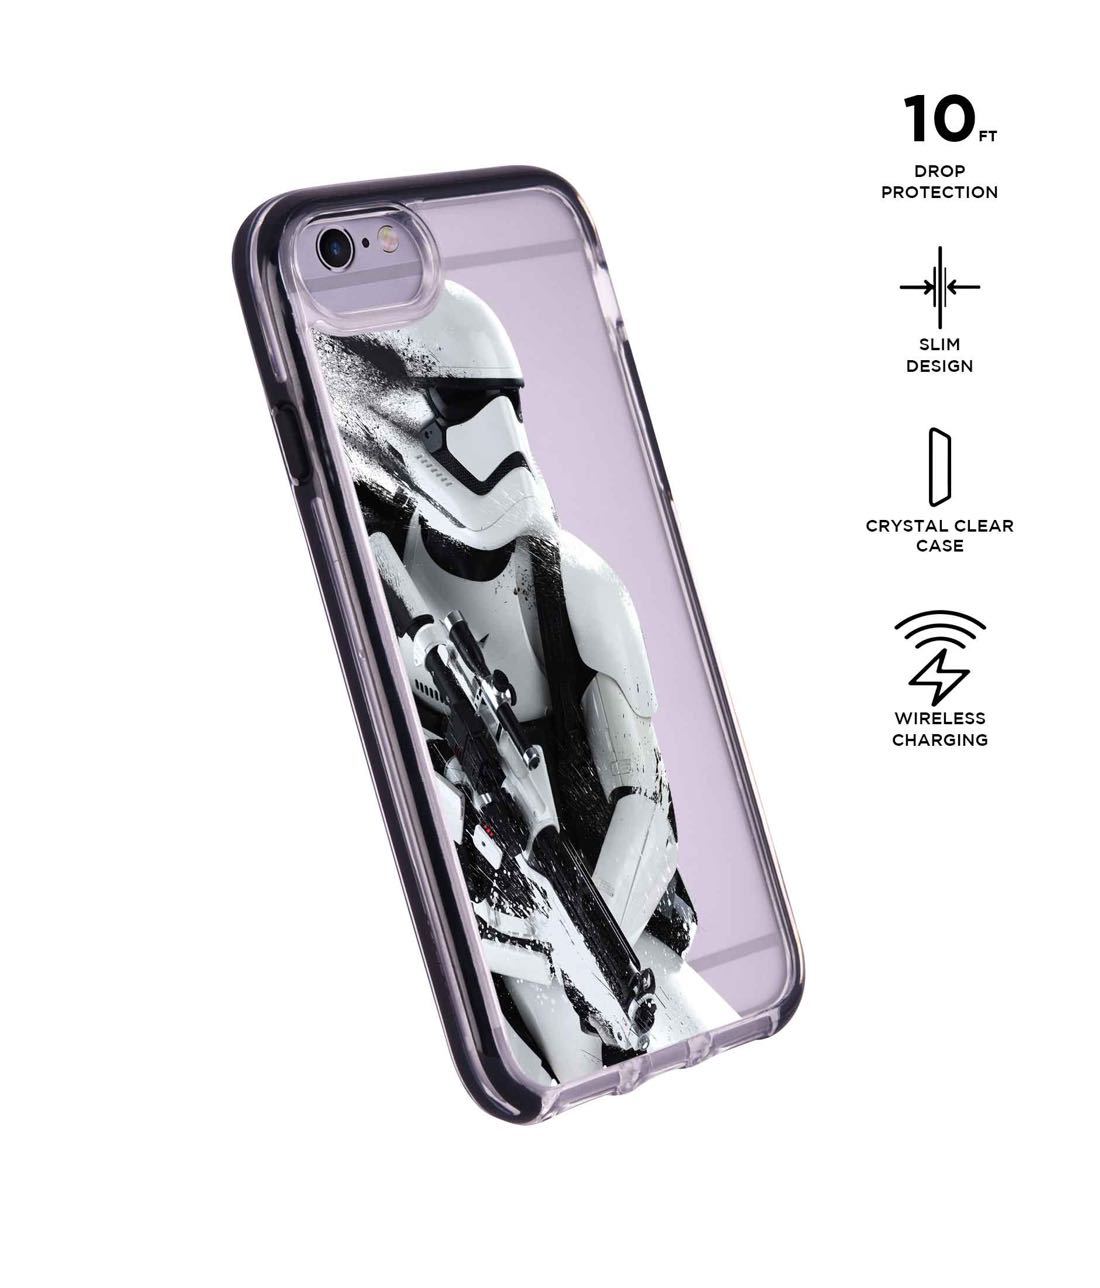 Trooper Storm - Extreme Phone Case for iPhone 6 Plus